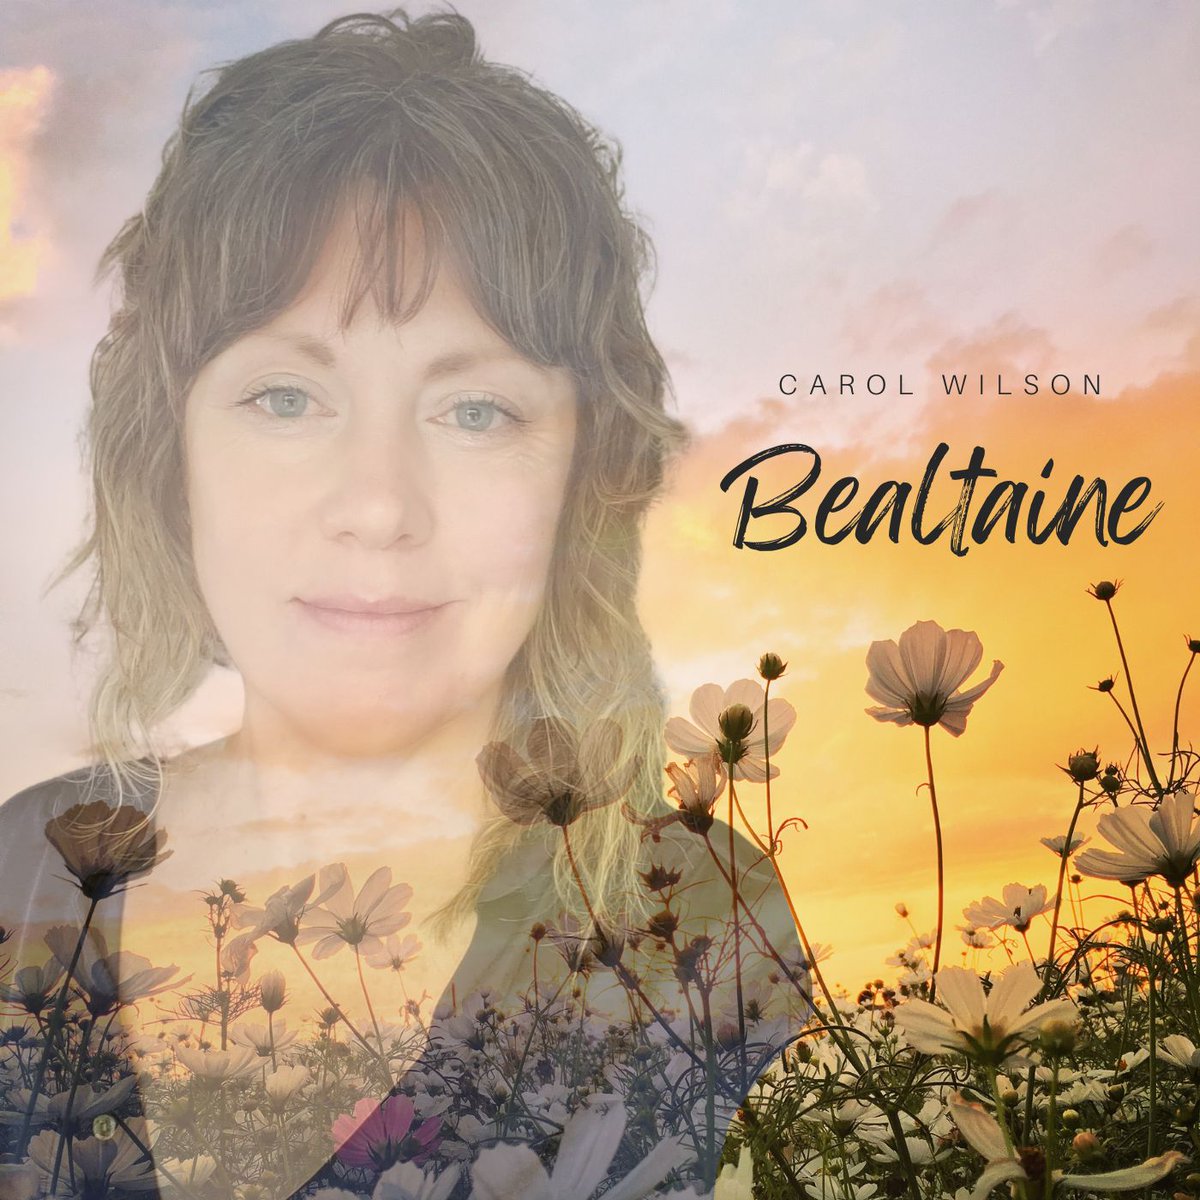 'Bealtaine' my second official release as Gaeilge will be out next week x
#newirishsingle #newirishmusic #bealtaine #bealtaine2024 #bealtainesong